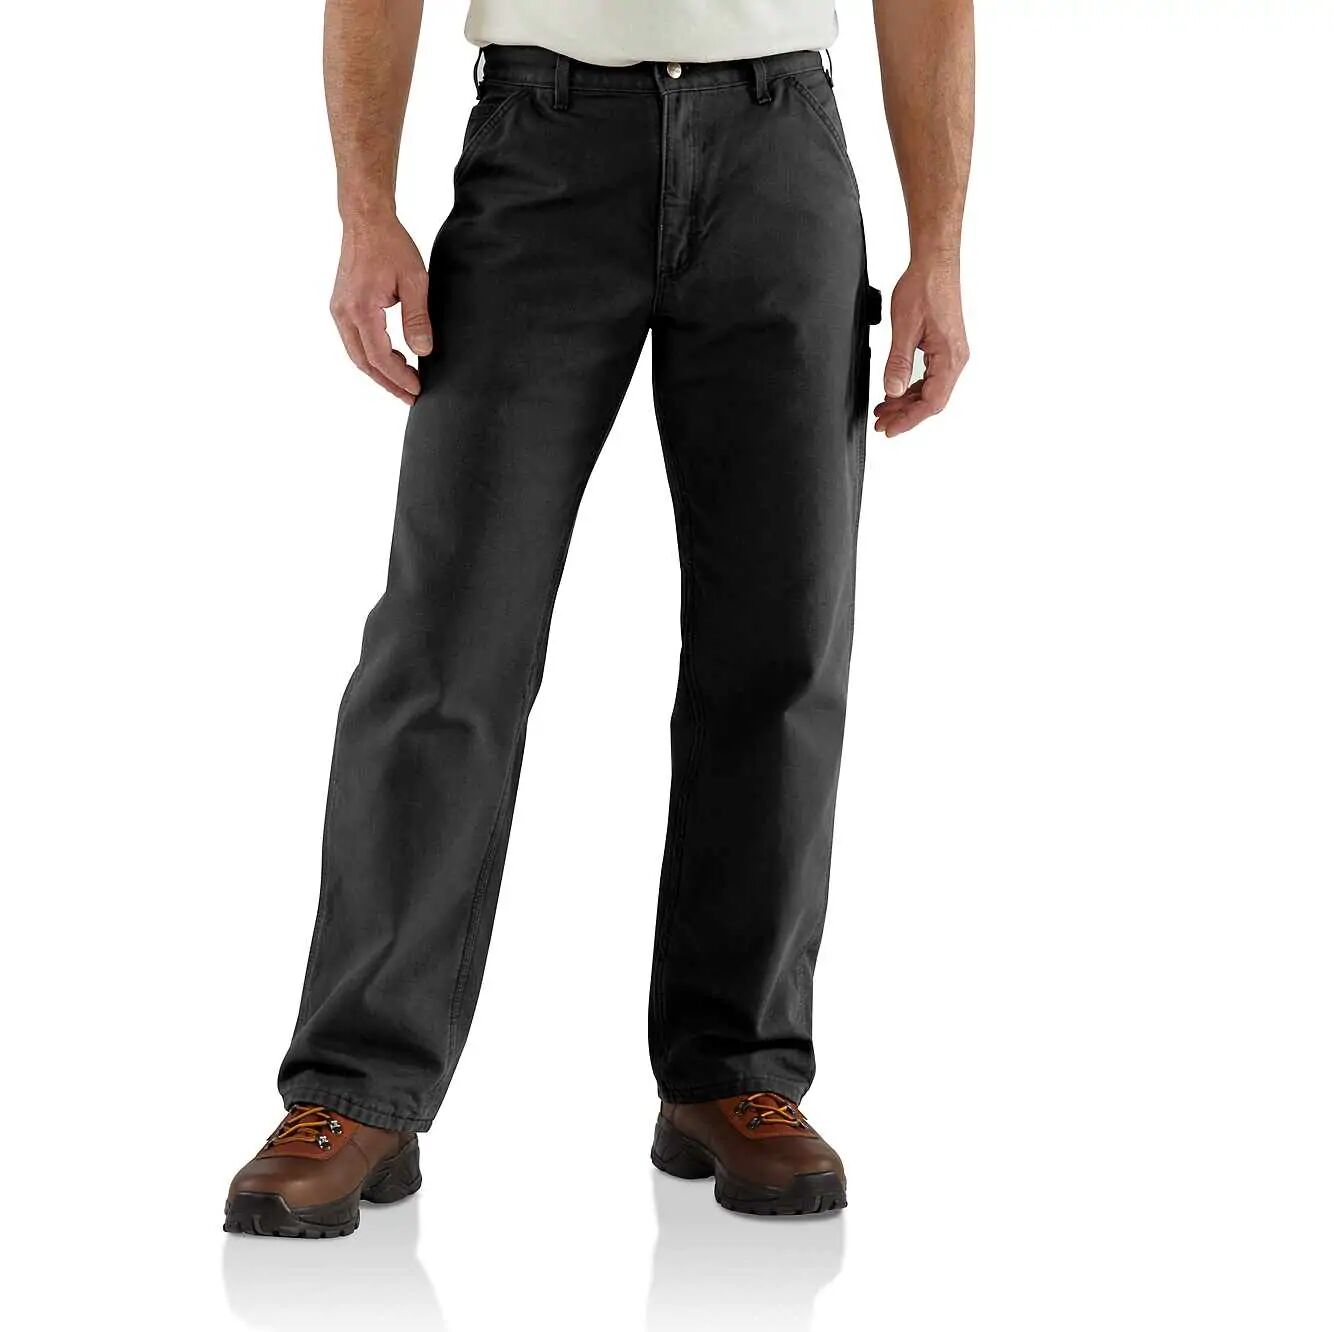 Men's Flannel Lined Washed Duck Dungaree Pant - Pants, Carhartt